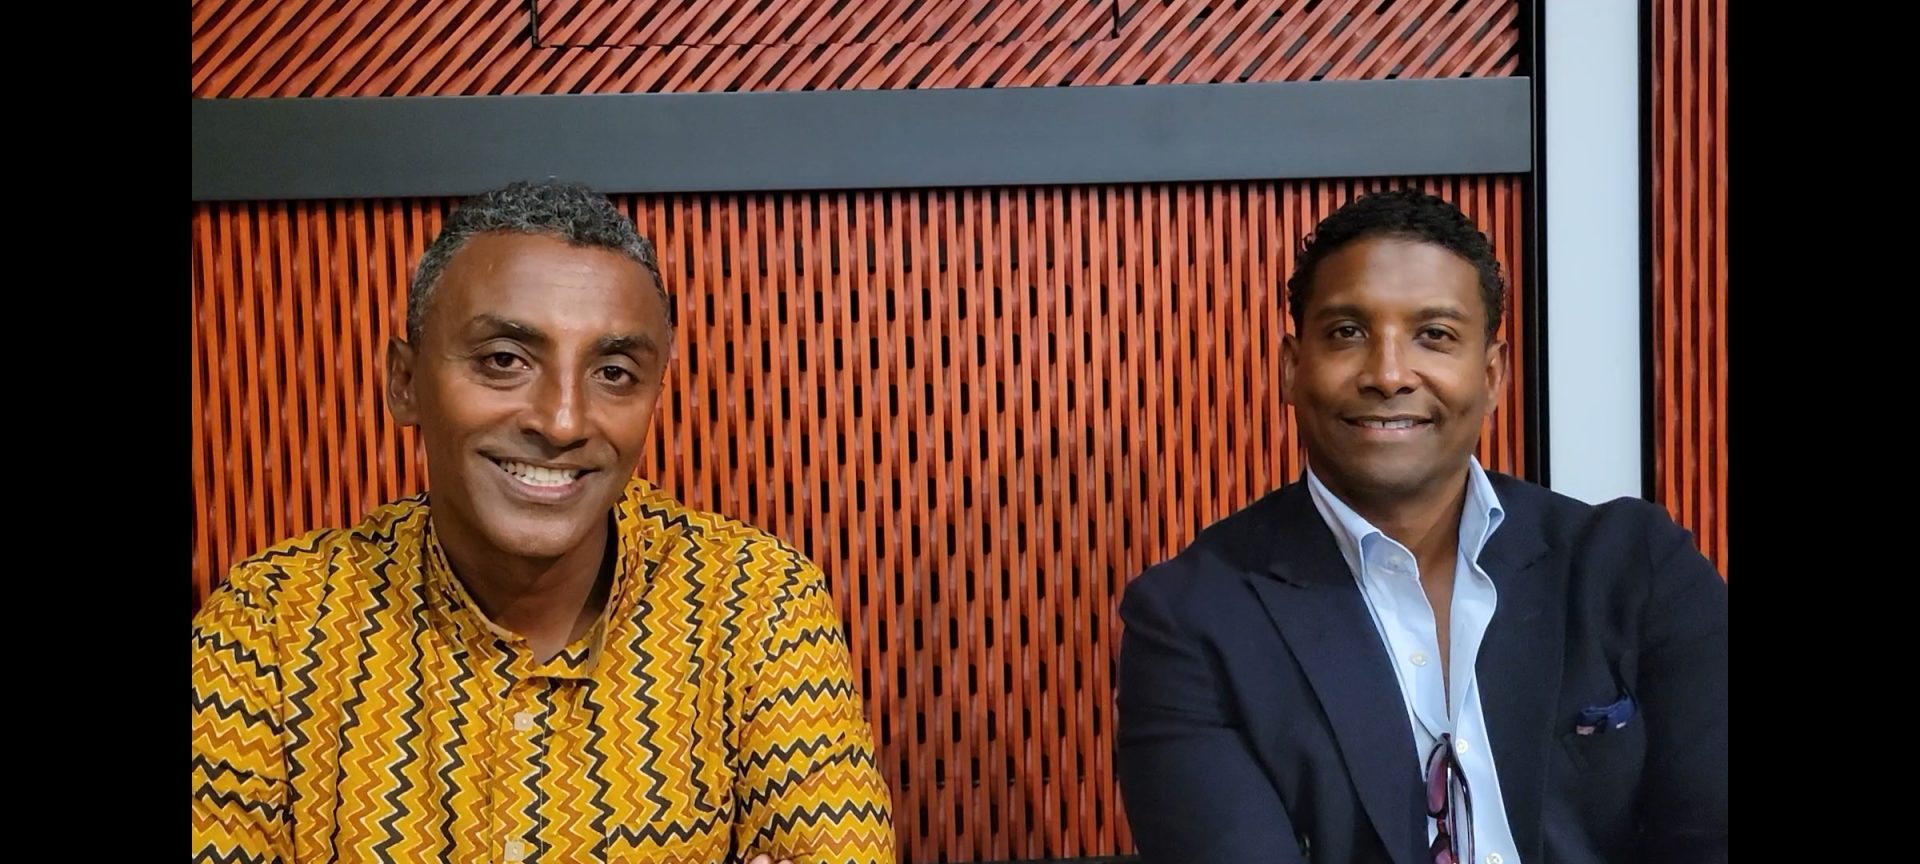 Marcus Samuelsson and Jay Norris. (Photo by Derrel Jazz Johnson for Rolling Out.)